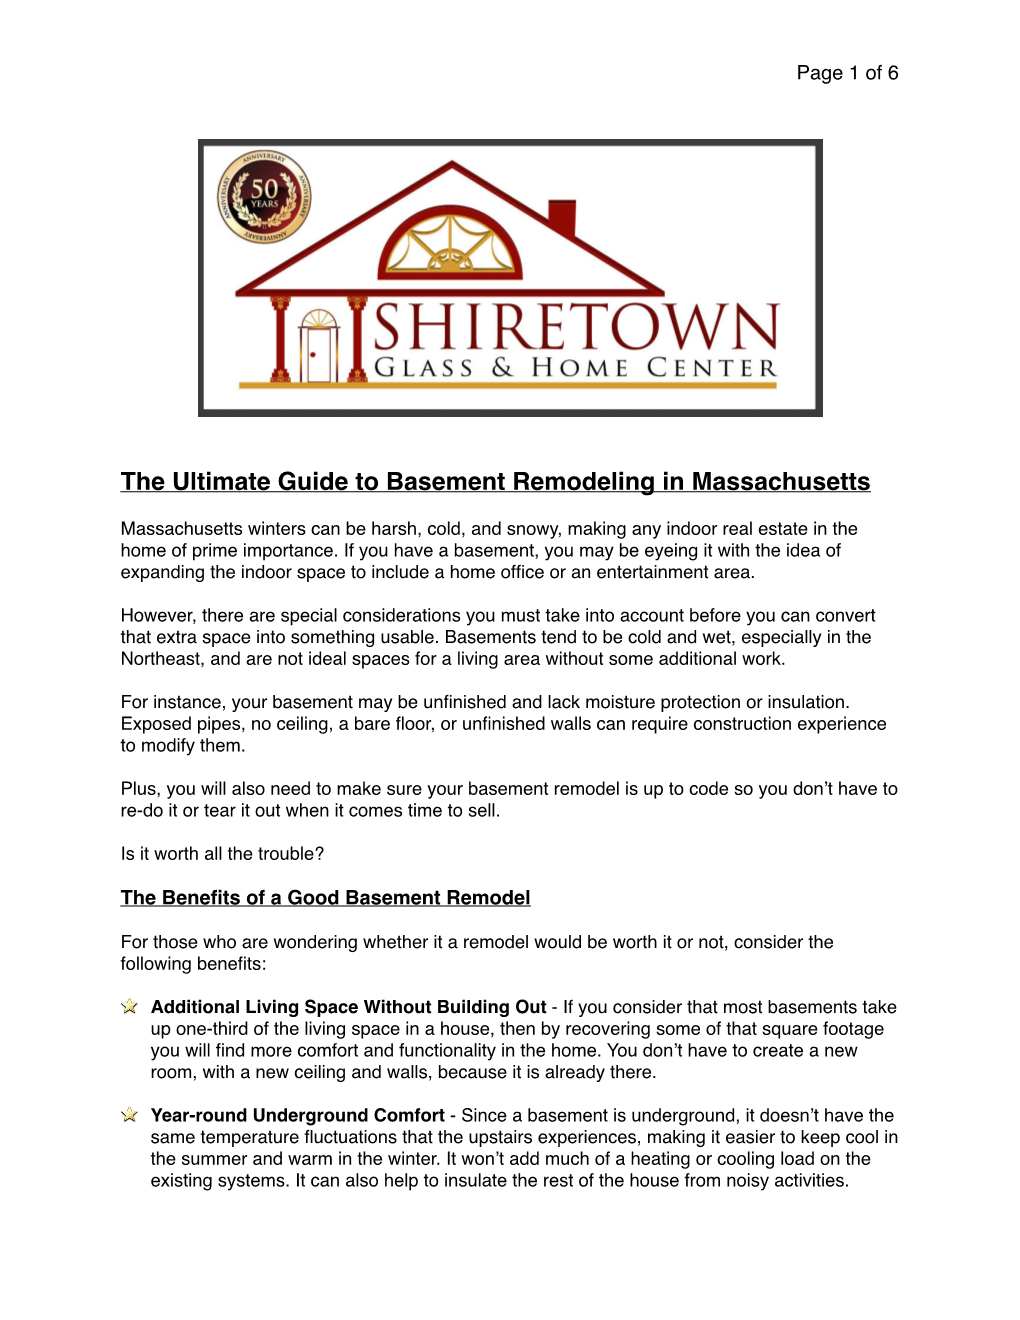 Ultimate Guide to Basement Remodeling MA